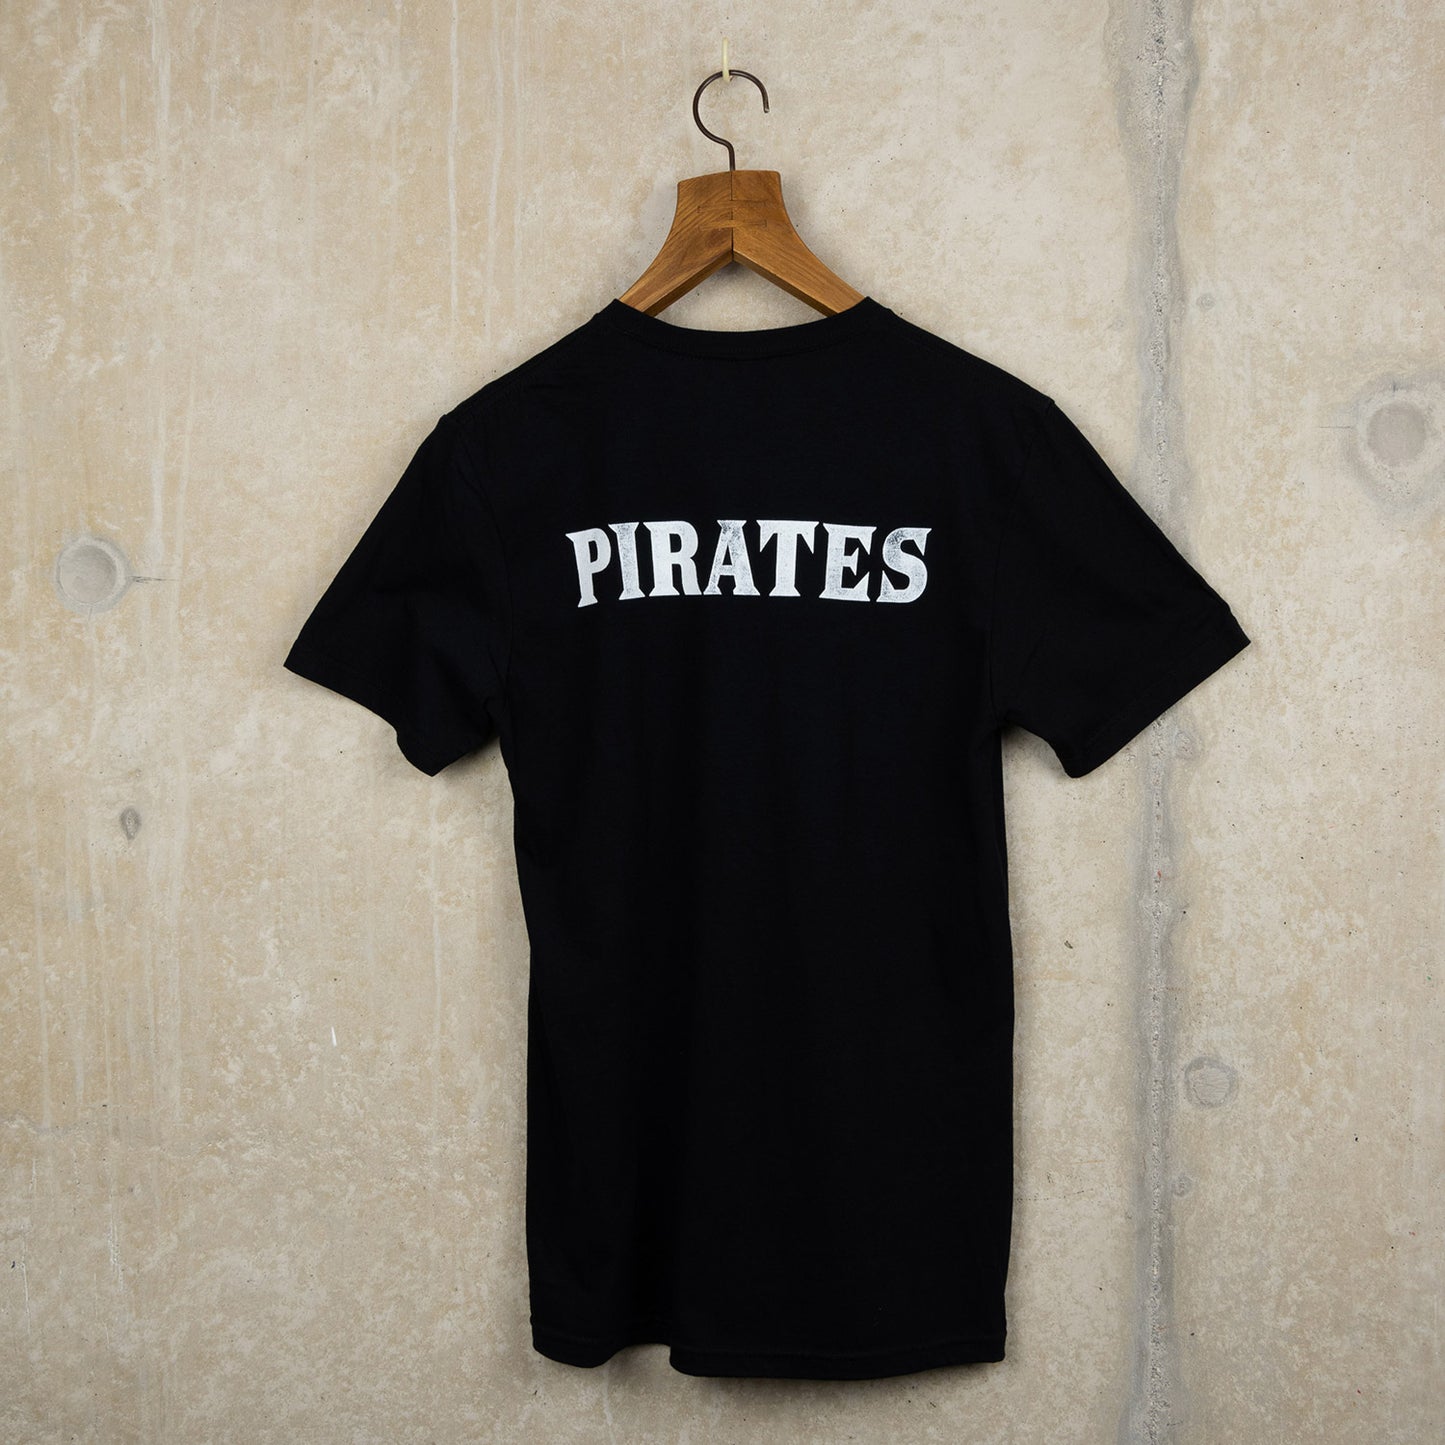 Black t-shirt with pirate exhibition artwork on the front and the word Pirates on the back